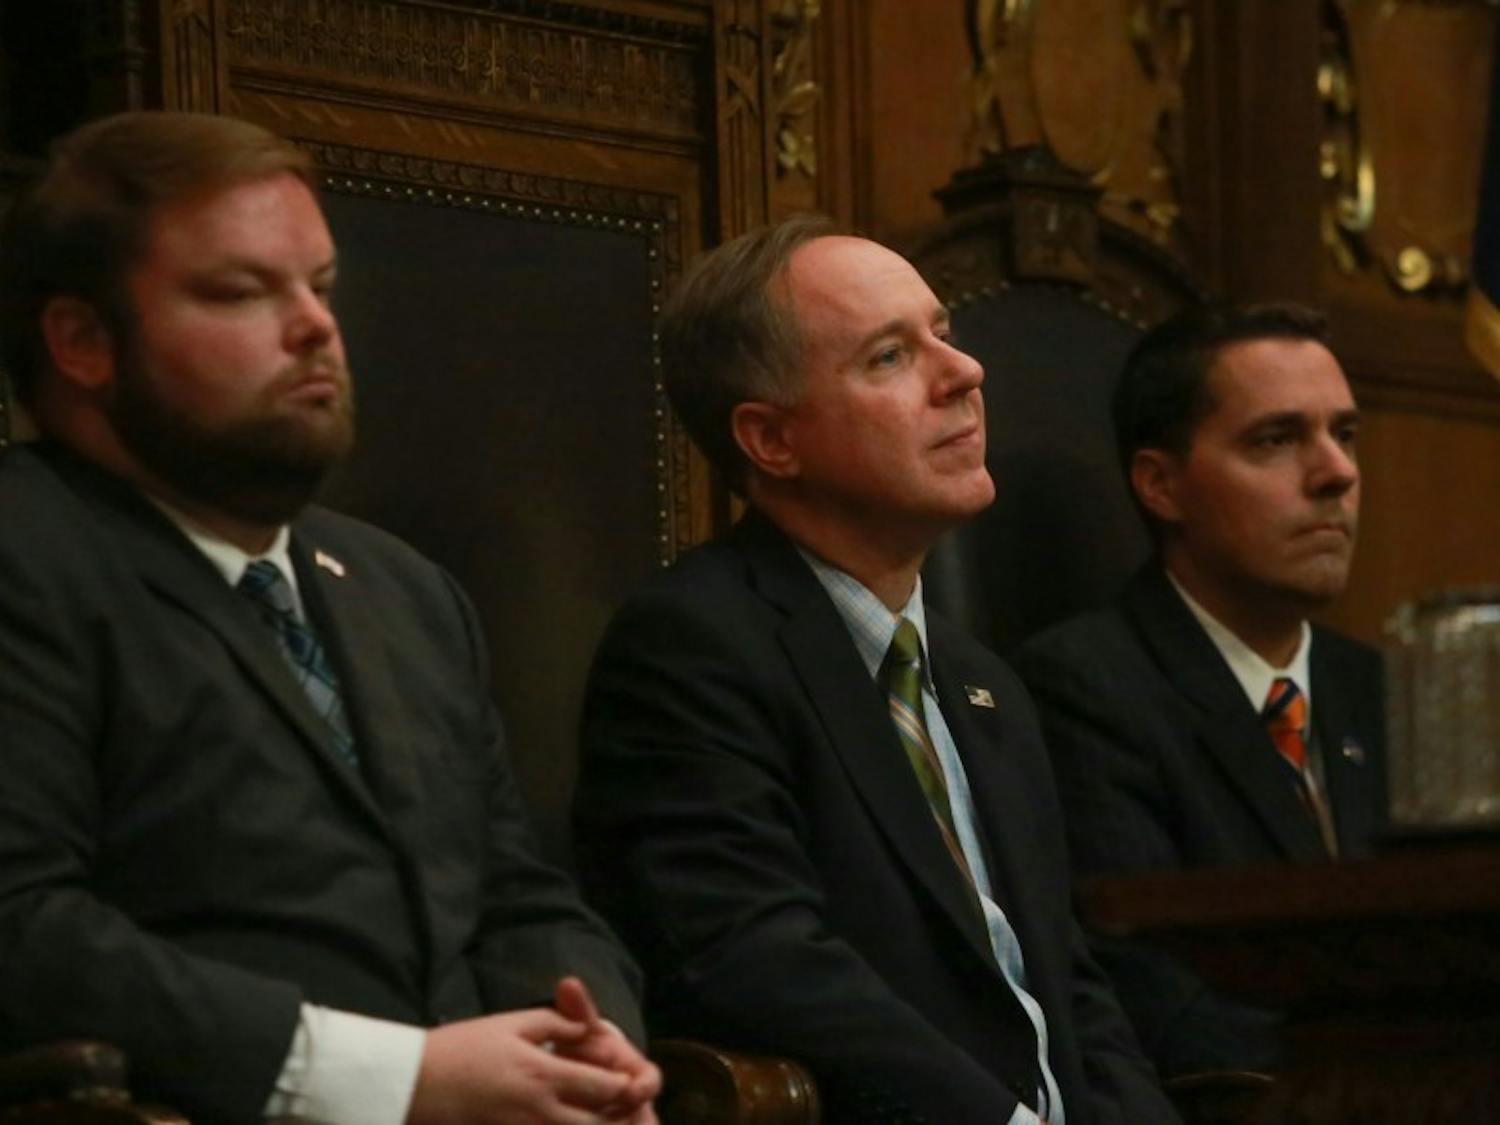 State Assembly Speaker Robin Vos, R-Rochester, came under fire Wednesday only appointing white lawmakers to a task force that will access the state’s prison system.